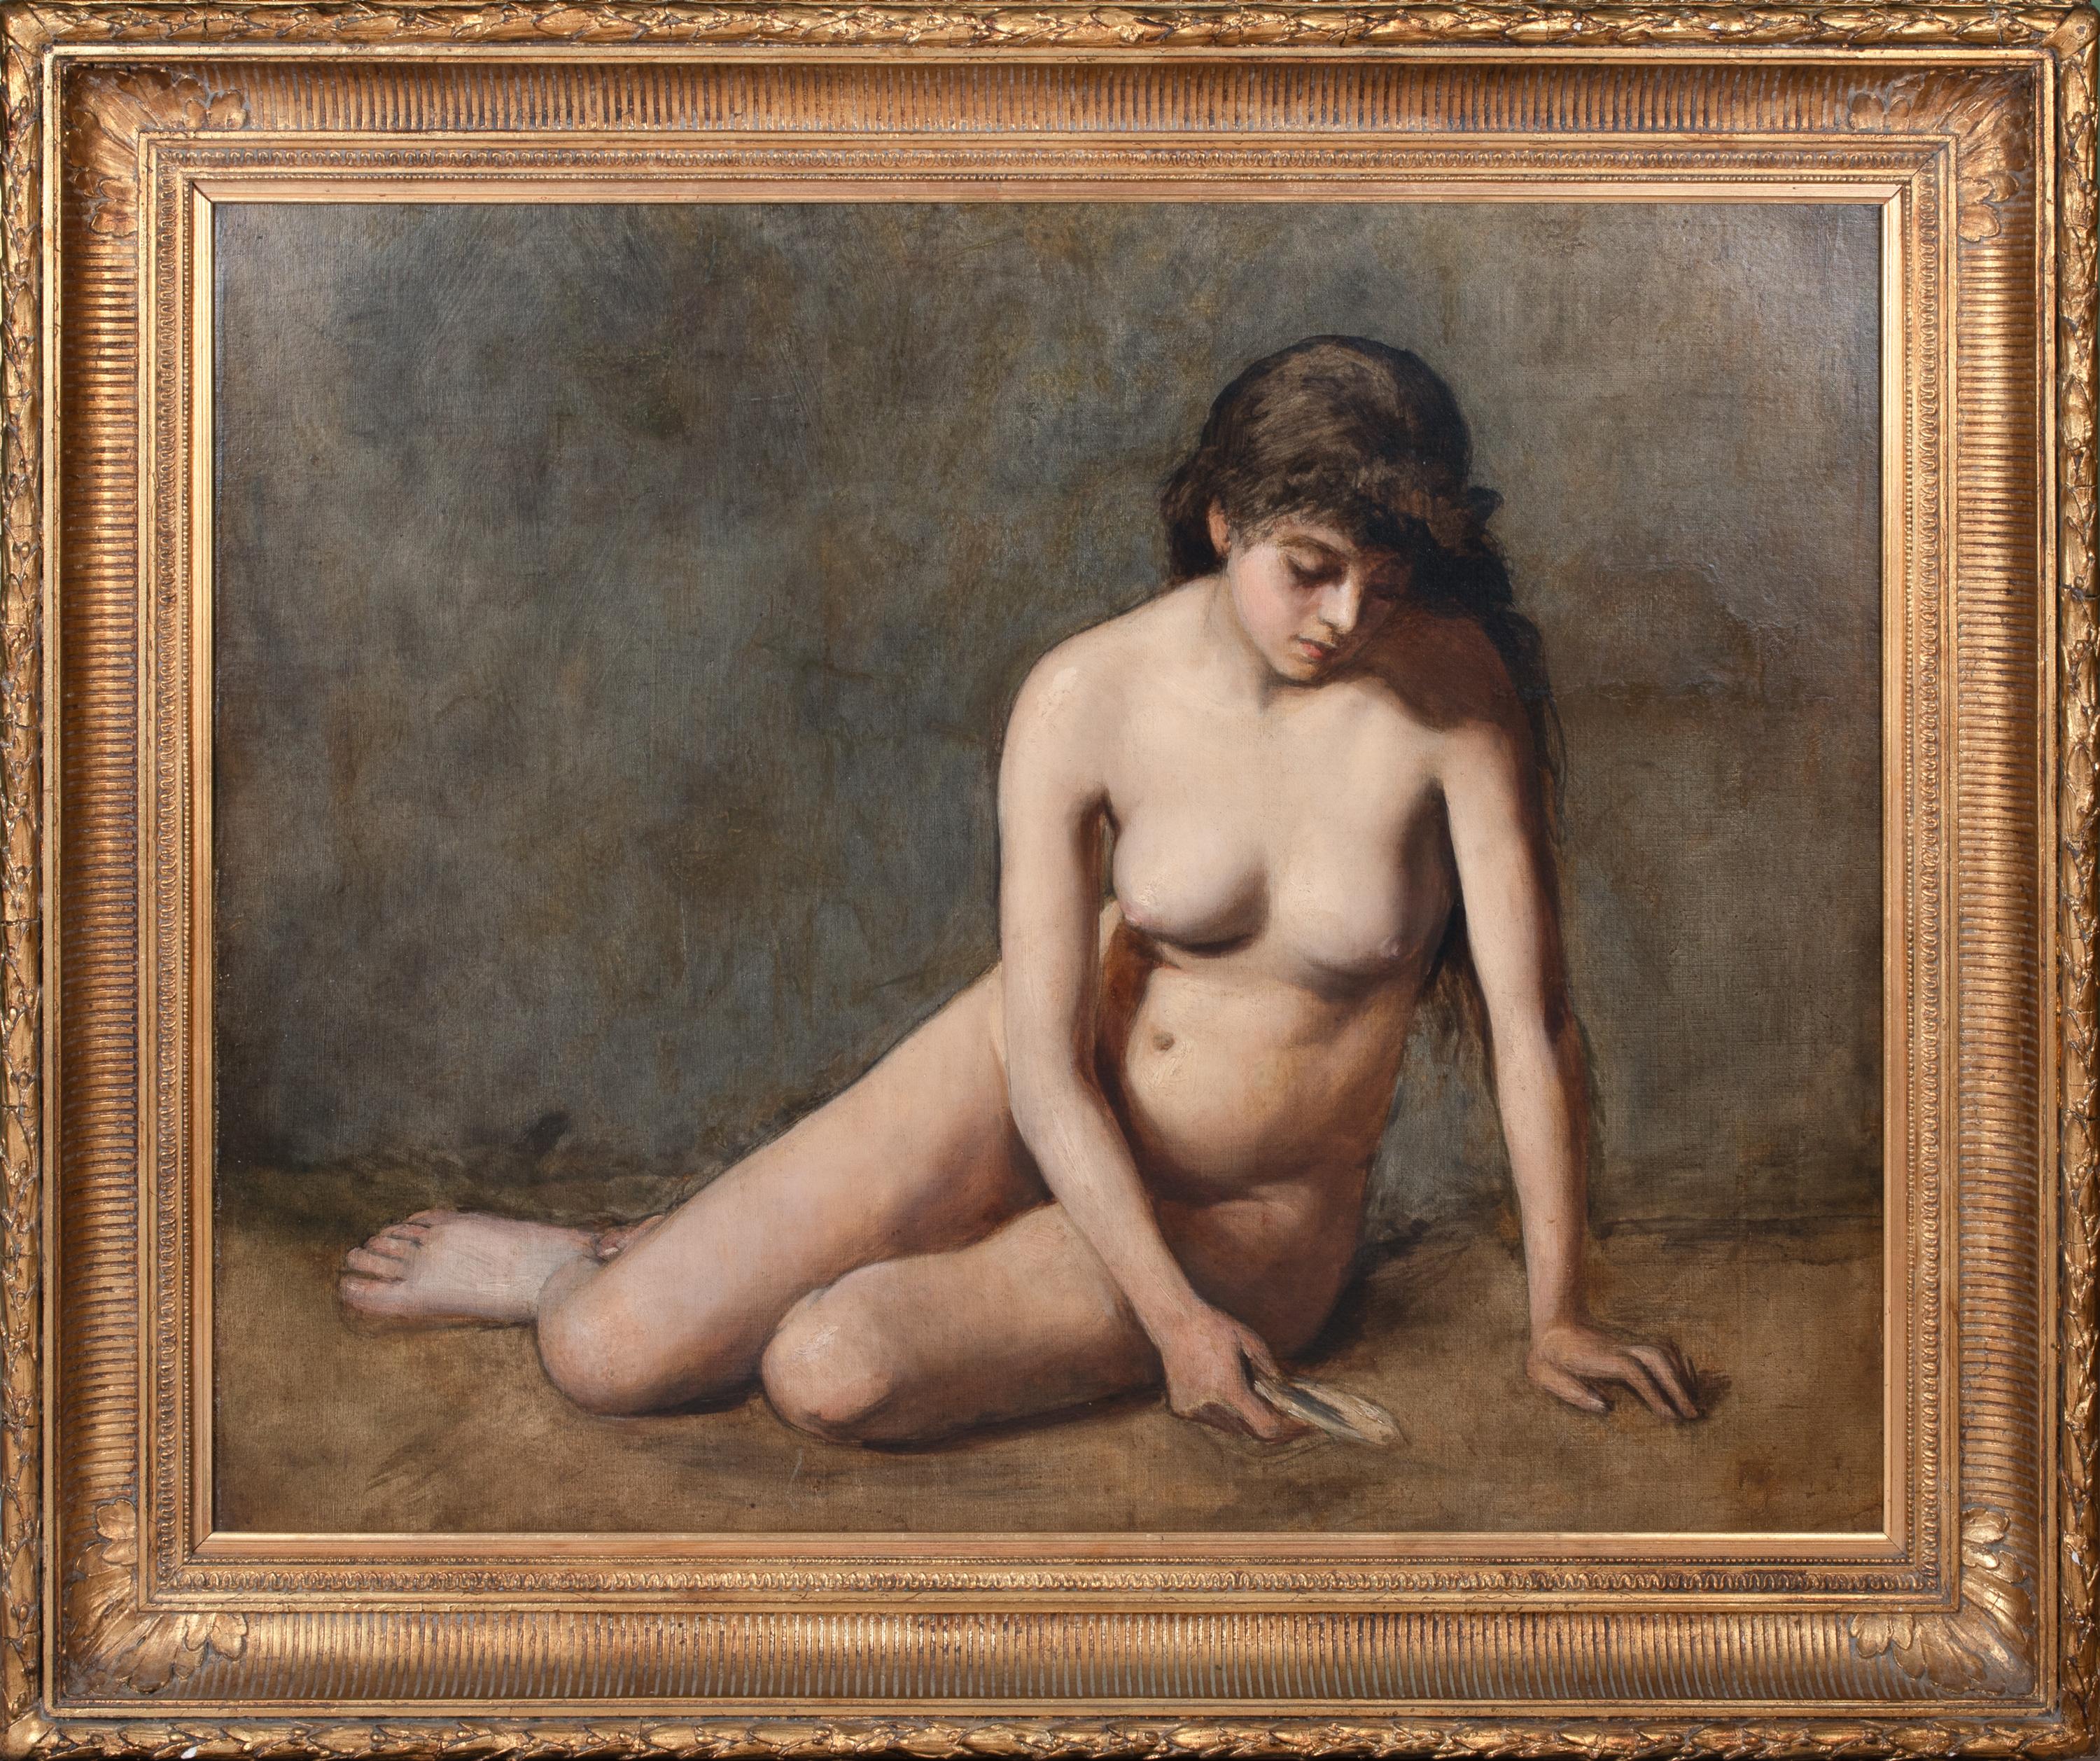 Jean-Baptiste-Camille Corot Portrait Painting - Nude Female Holding a Seashell, 19th Century 